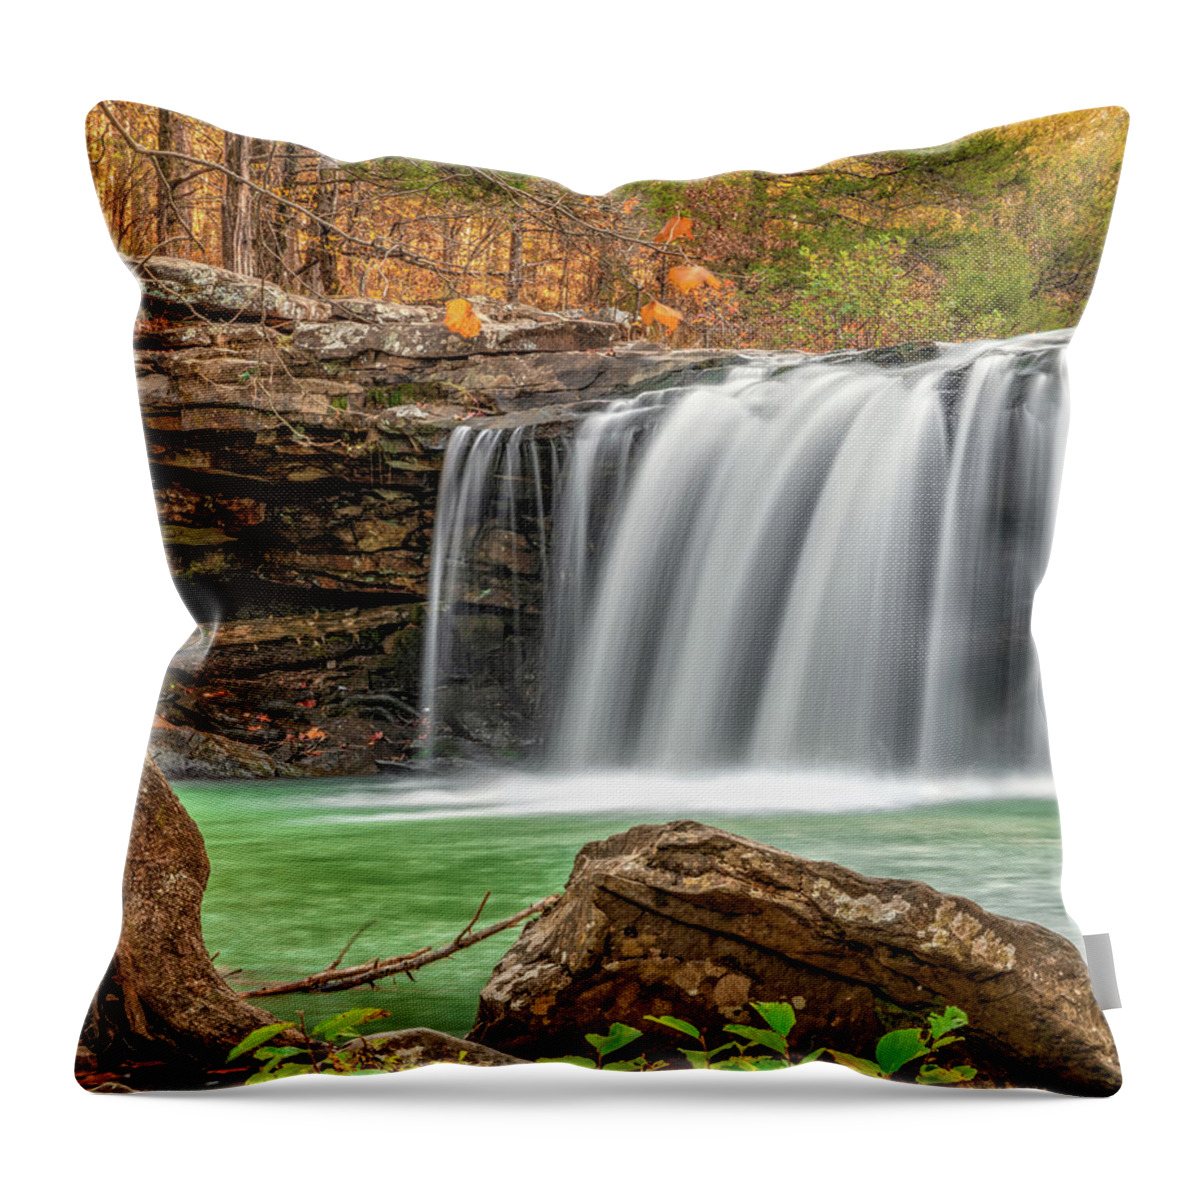 Falling Water Throw Pillow featuring the photograph Natural State Autumn Waterfall - Falling Water Falls by Gregory Ballos